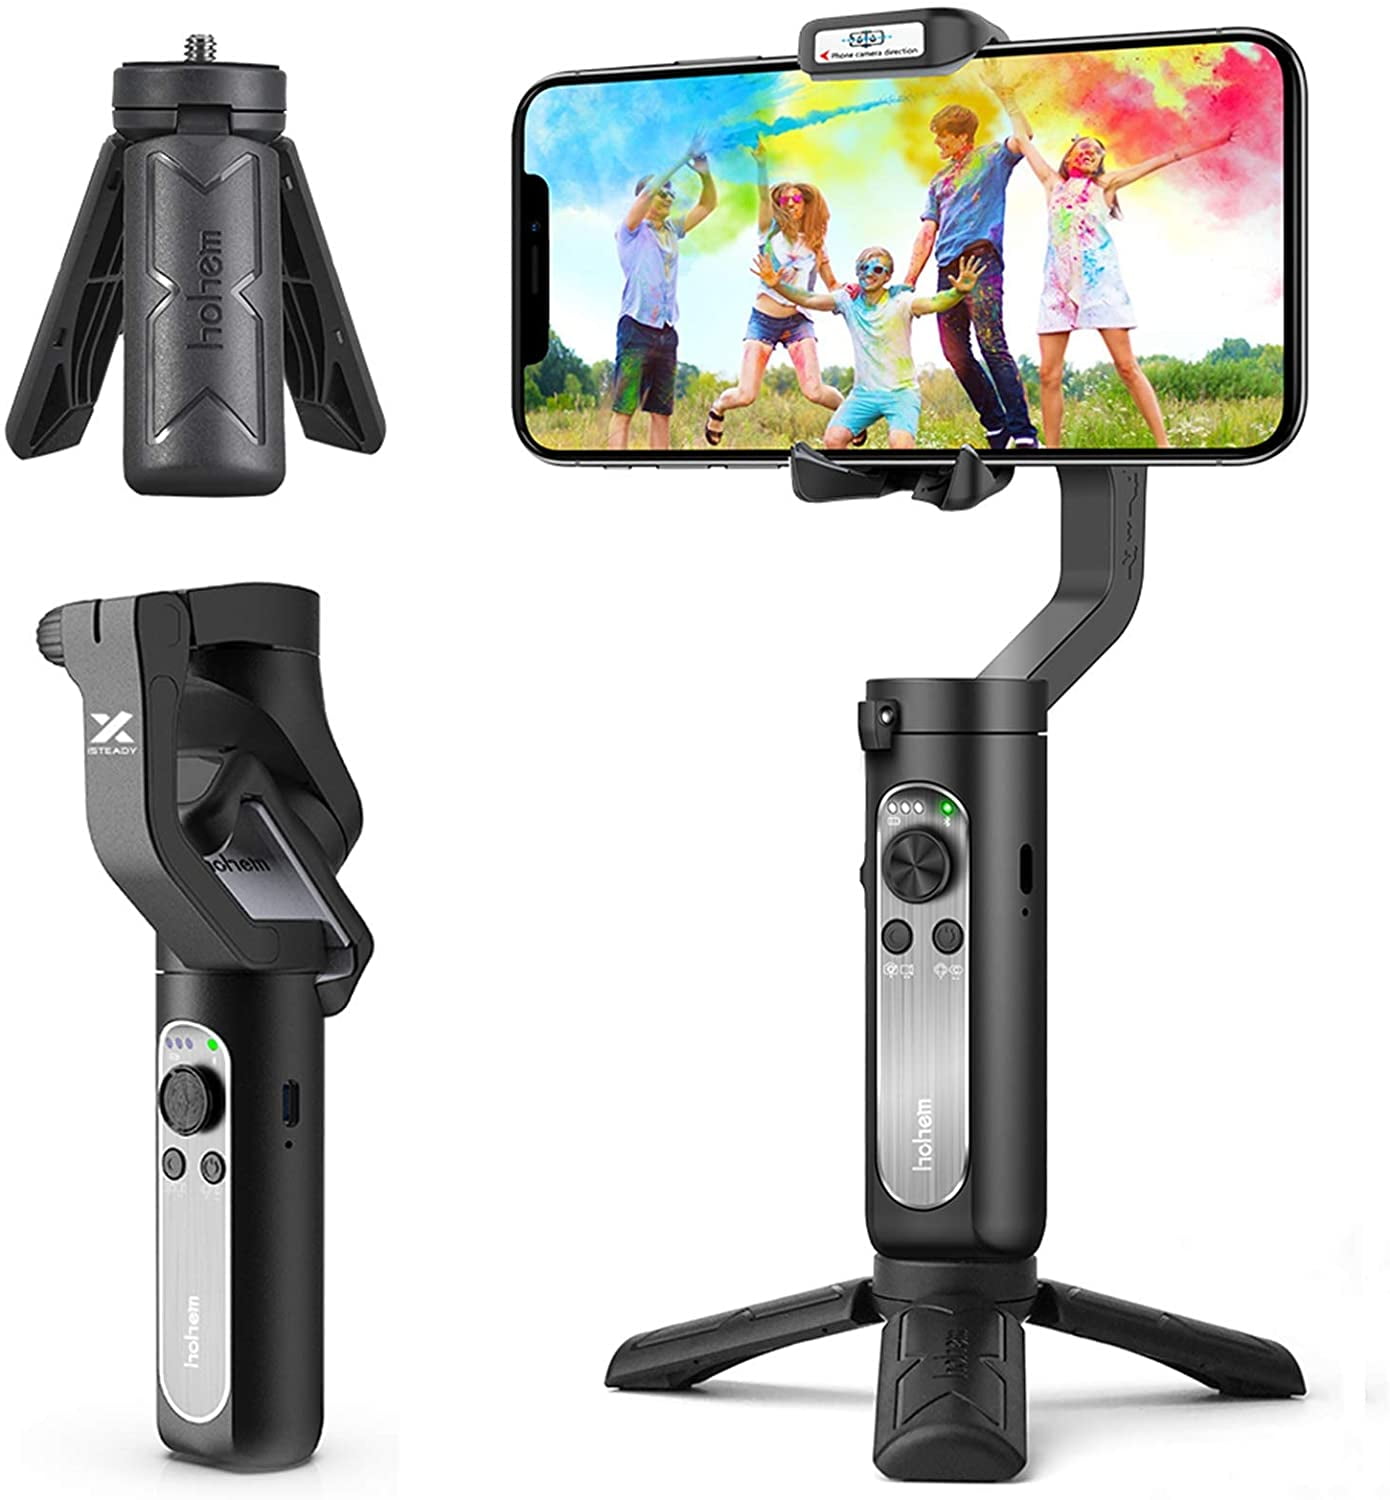 3-Axis Gimbal Stabilizer for Smartphone - Lightweight Foldable Phone Gimbal  w/ Auto Inception Dolly-Zoom Time-Lapse, Handheld Gimbal for iPhone 12 pro  max/11/Xs Max/Samsung - HANYWAY.GOiSteady X - Walmart.com